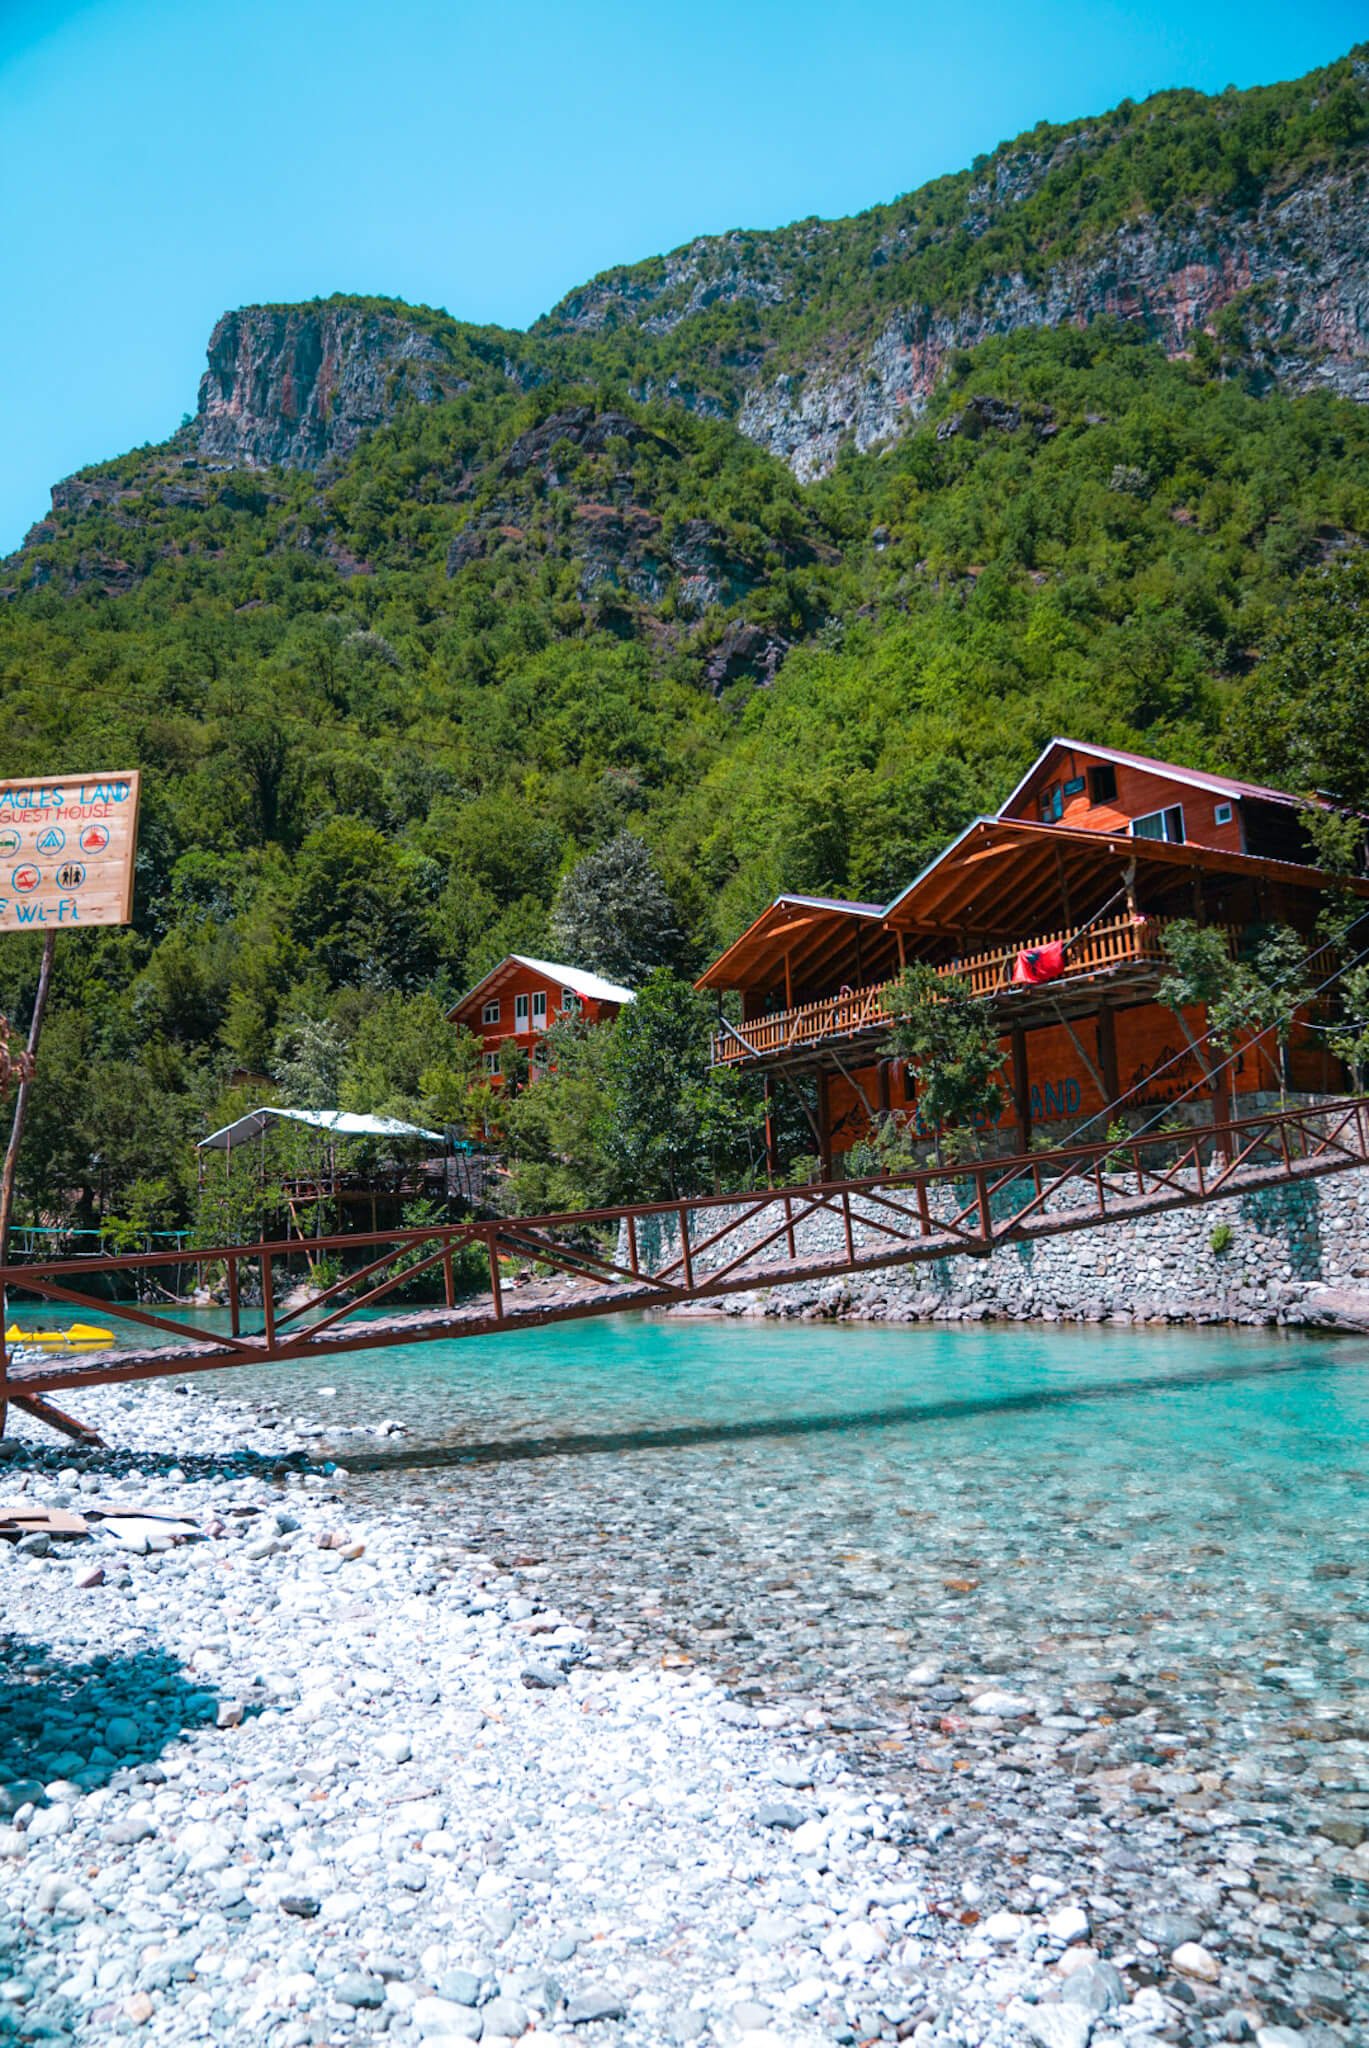 Eagles Landing, Lumi I Shales, an incredible place in Albania